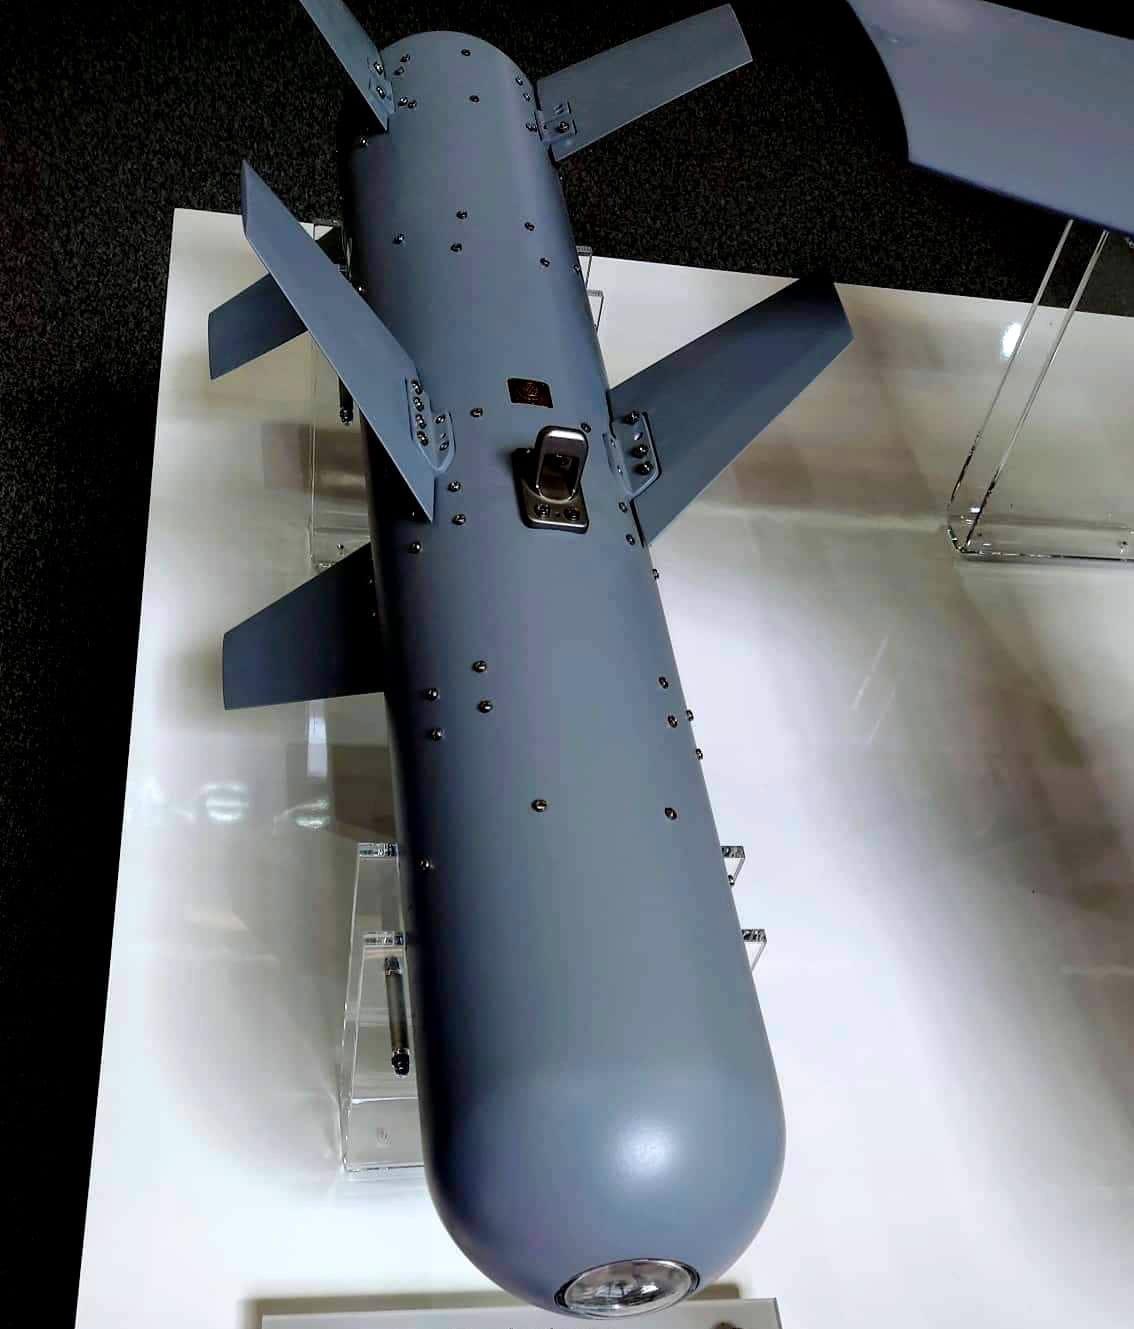 The drone will receive MAM-L munitions as armament